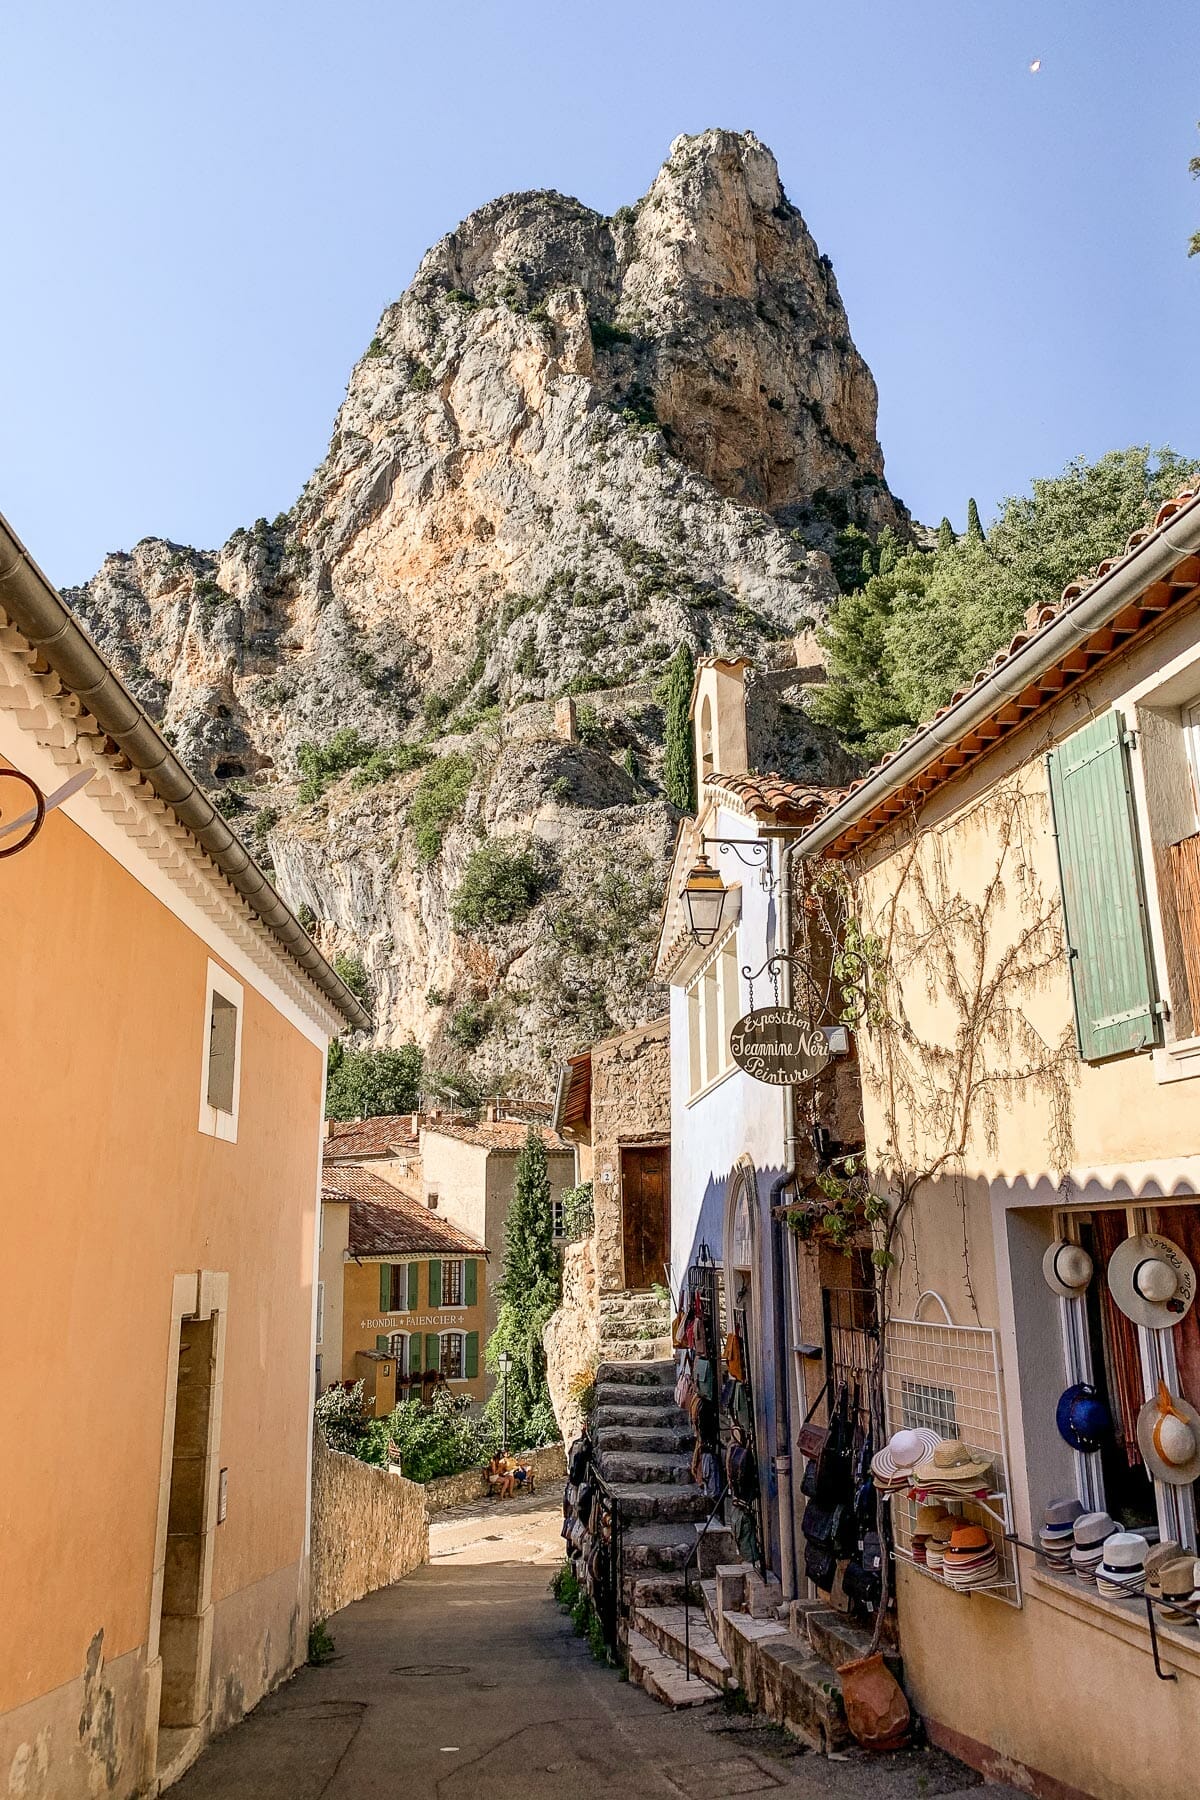 The charming town of Moustiers-Sainte-Marie in Provence